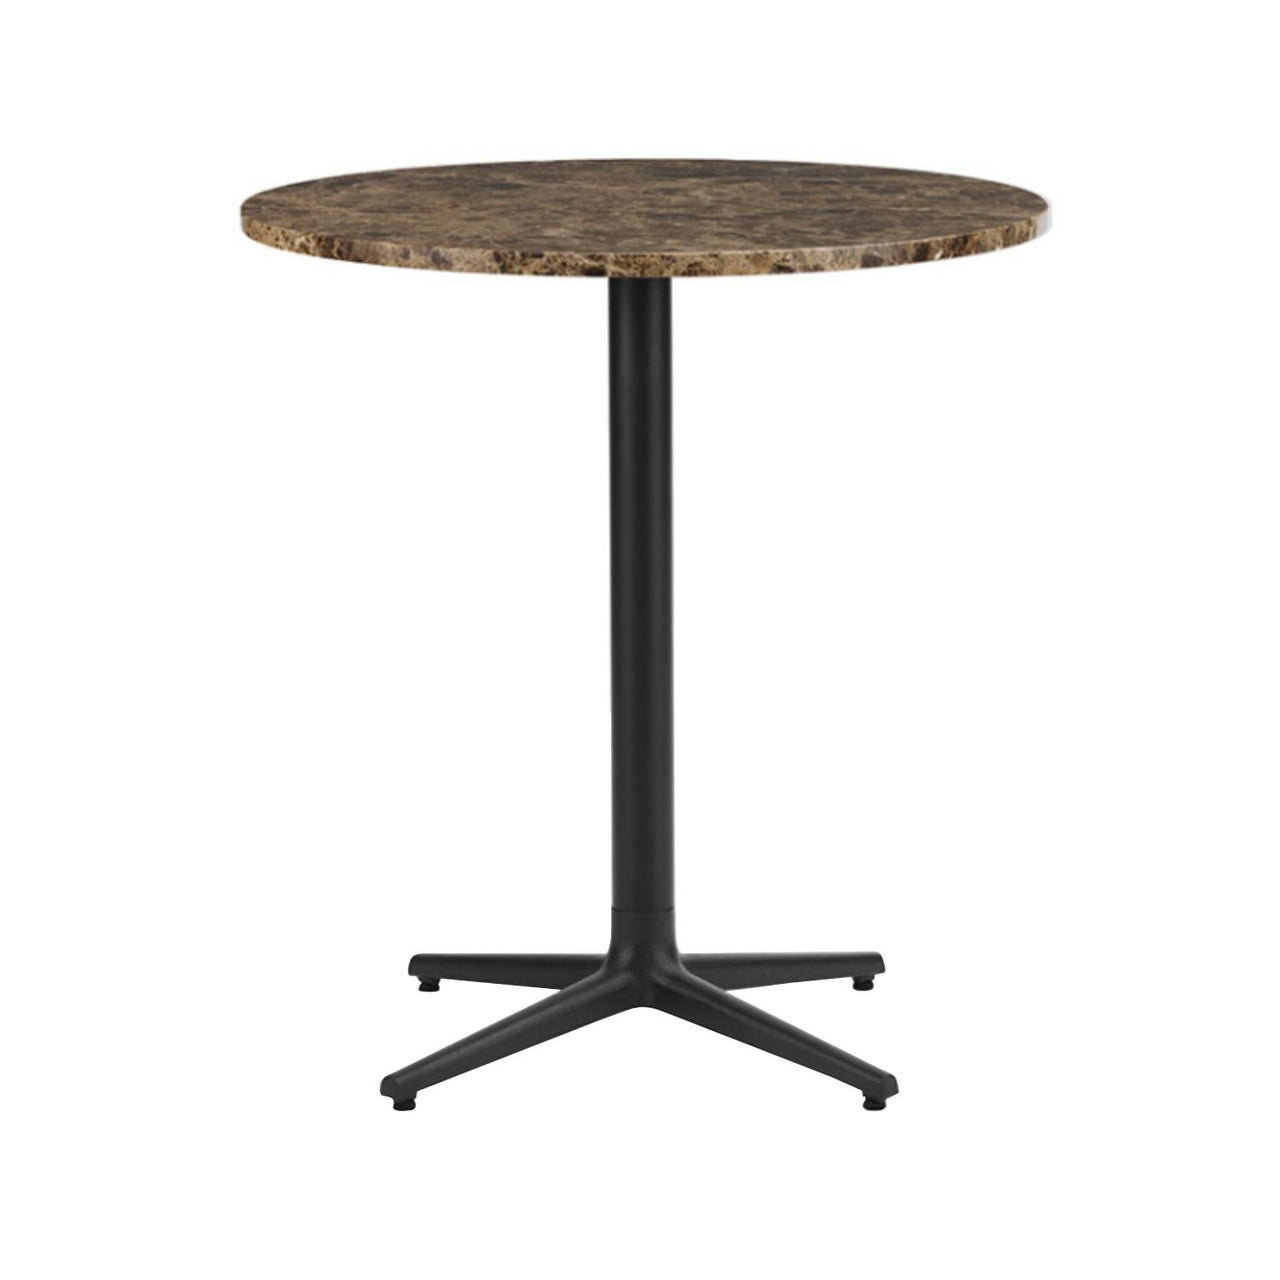 Allez Table: Round + Large - 27.5